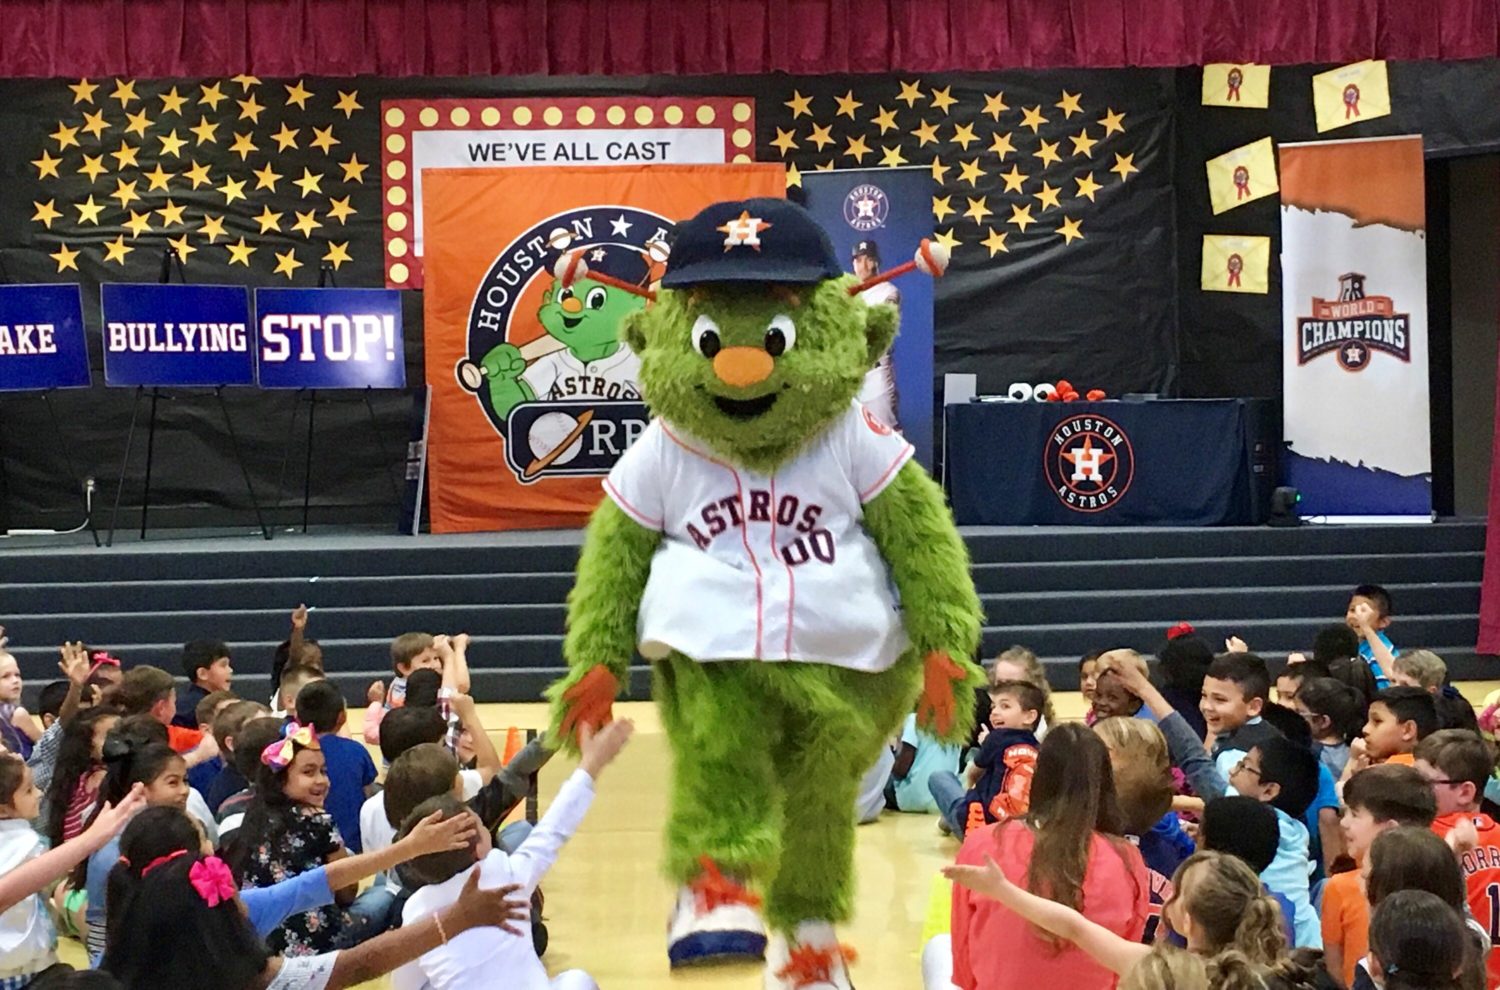 "a student assembly receives a visit from the Houston Astros mascot"